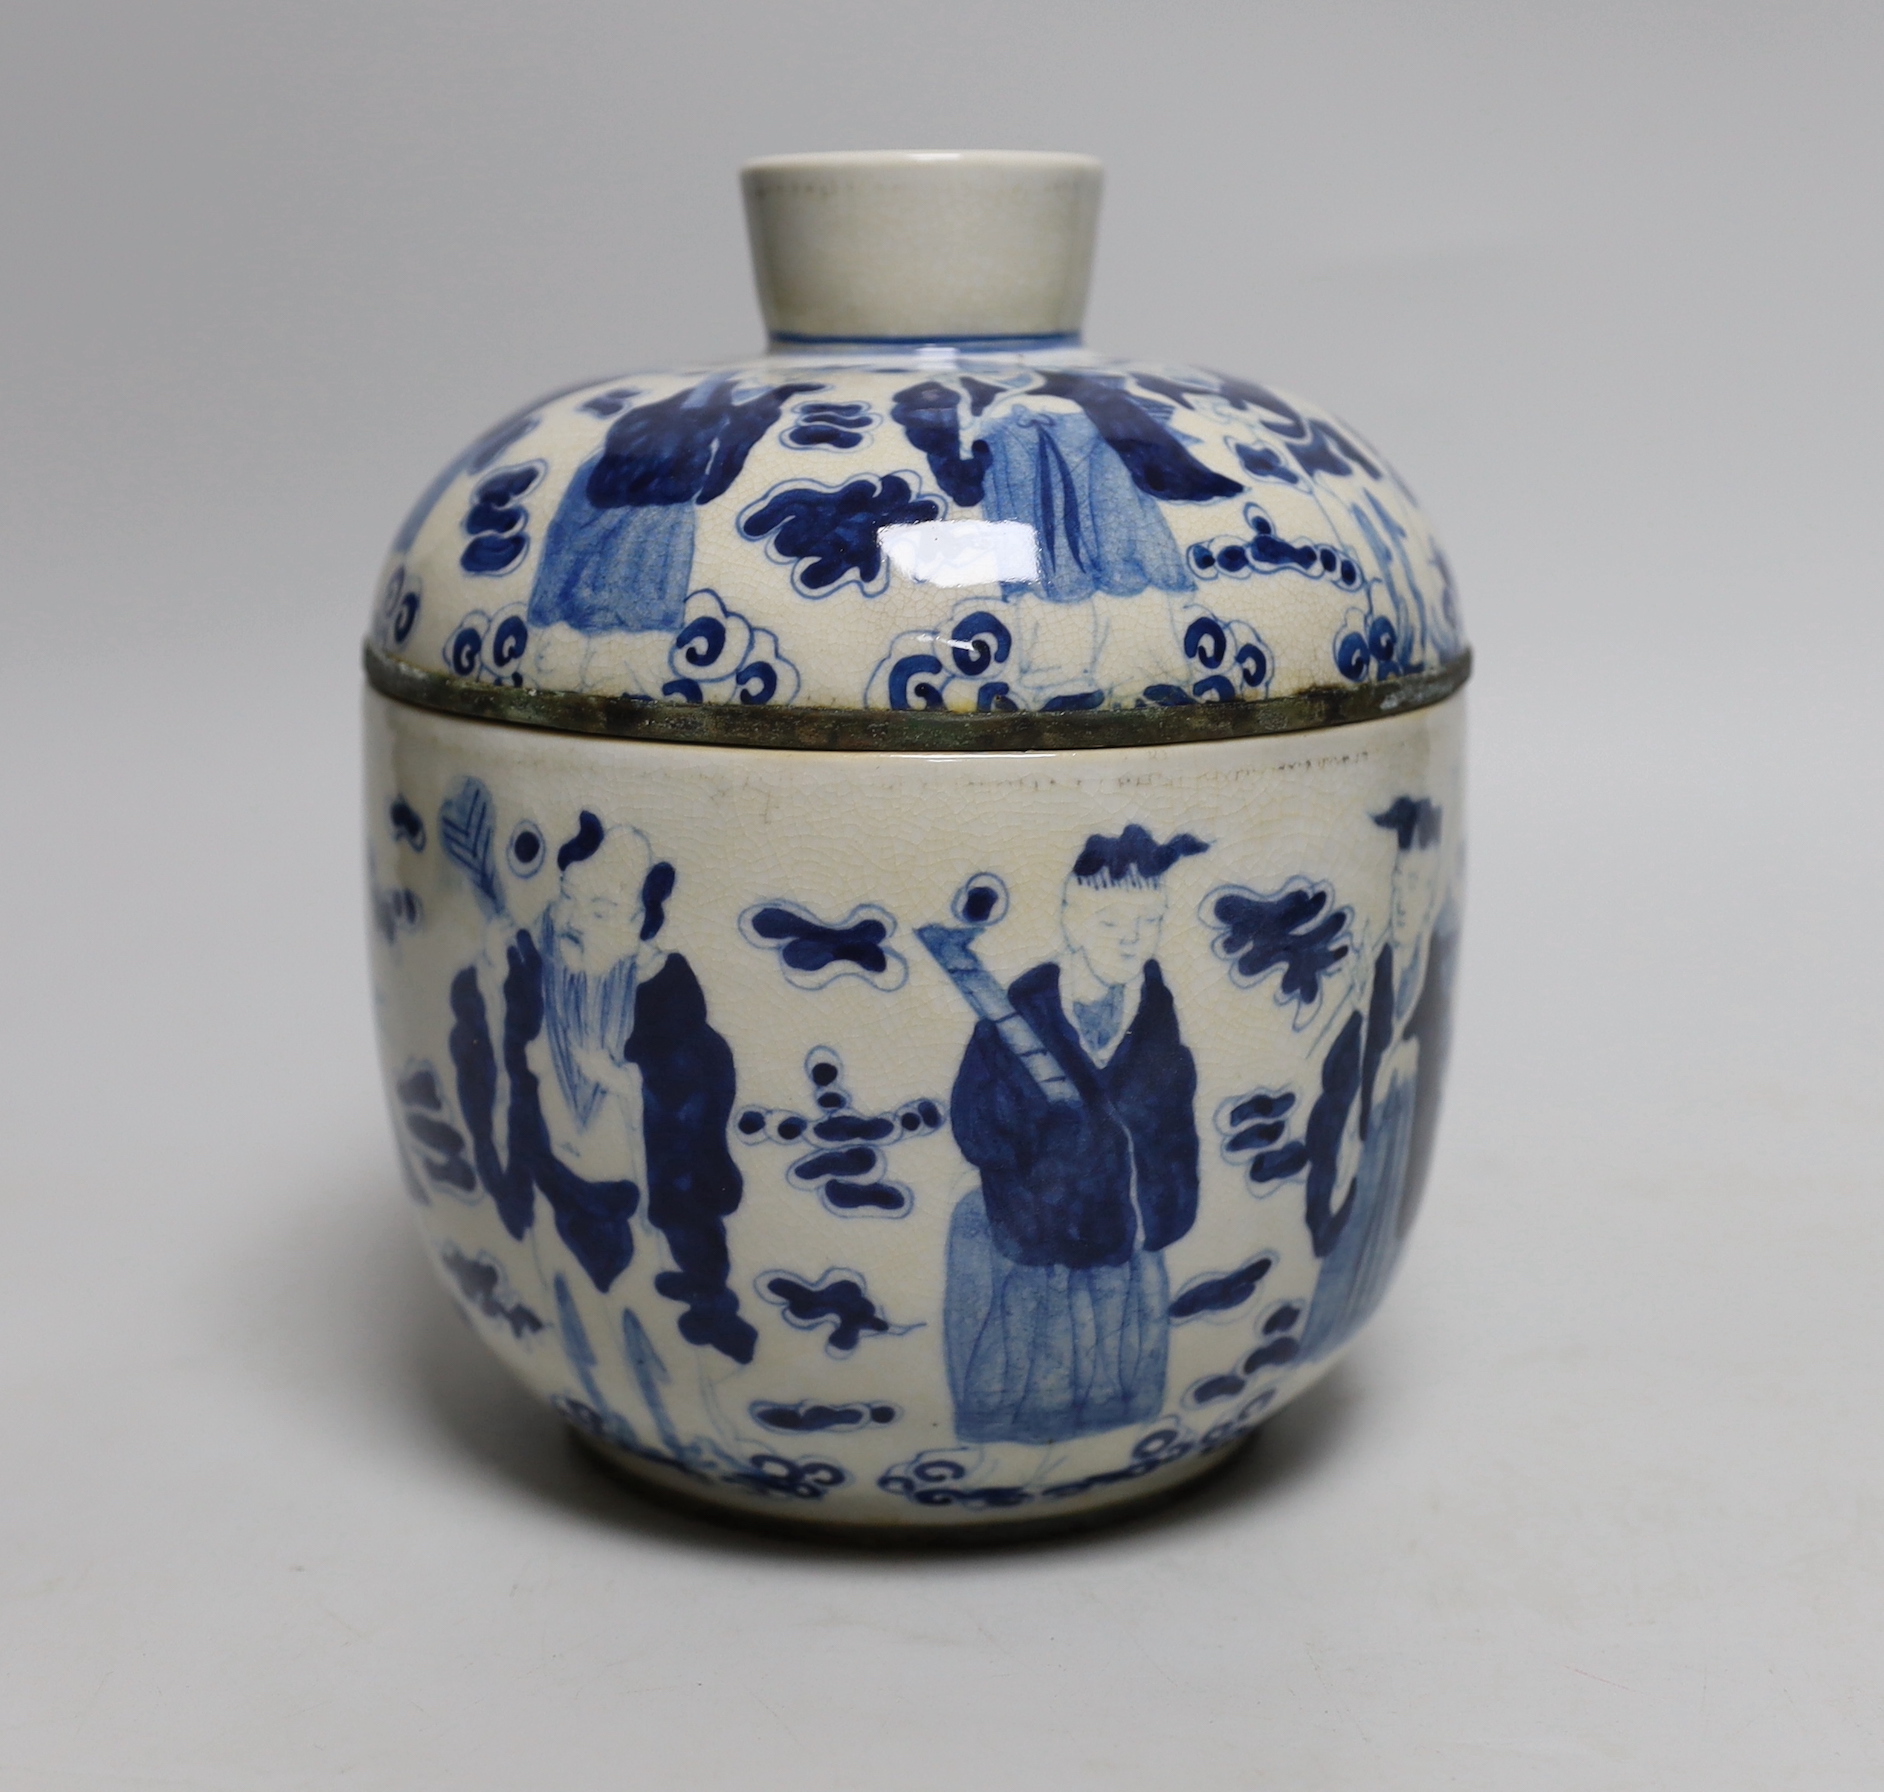 A 20th century Chinese jar and cover with 8 immortals, 18cm